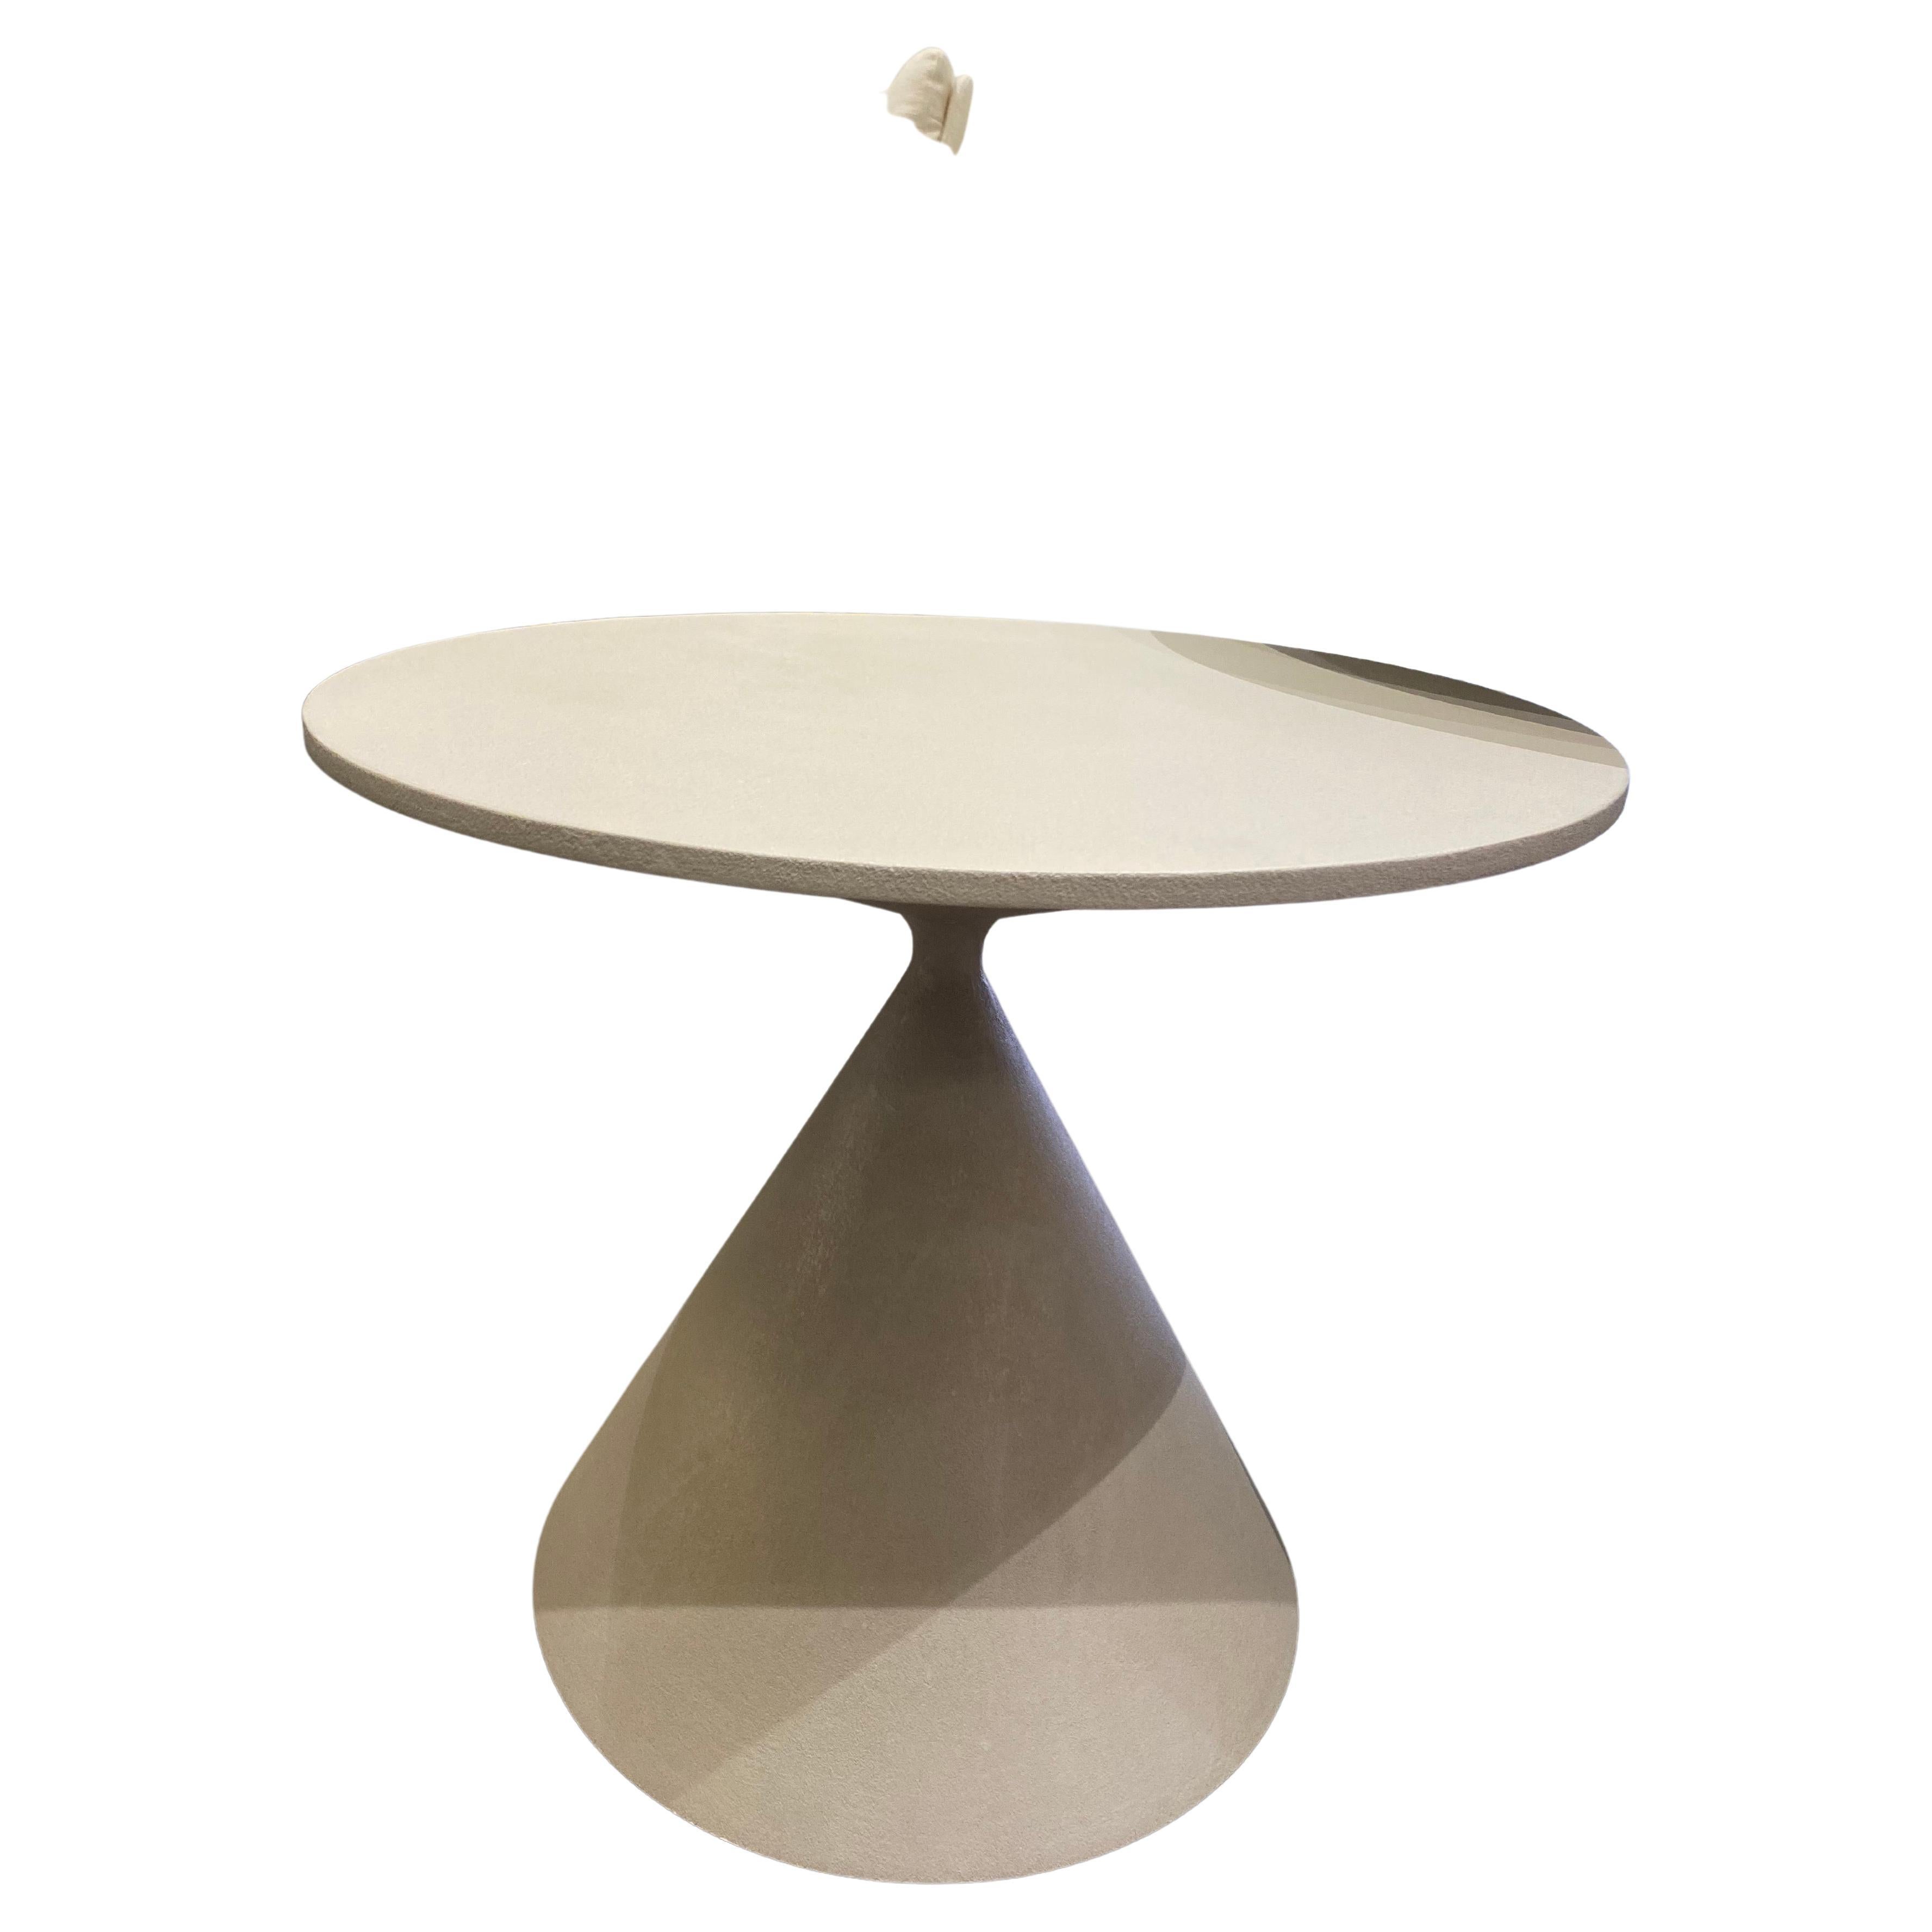  Desalto Mini Clay Side Table by Marc Krusin in Stock